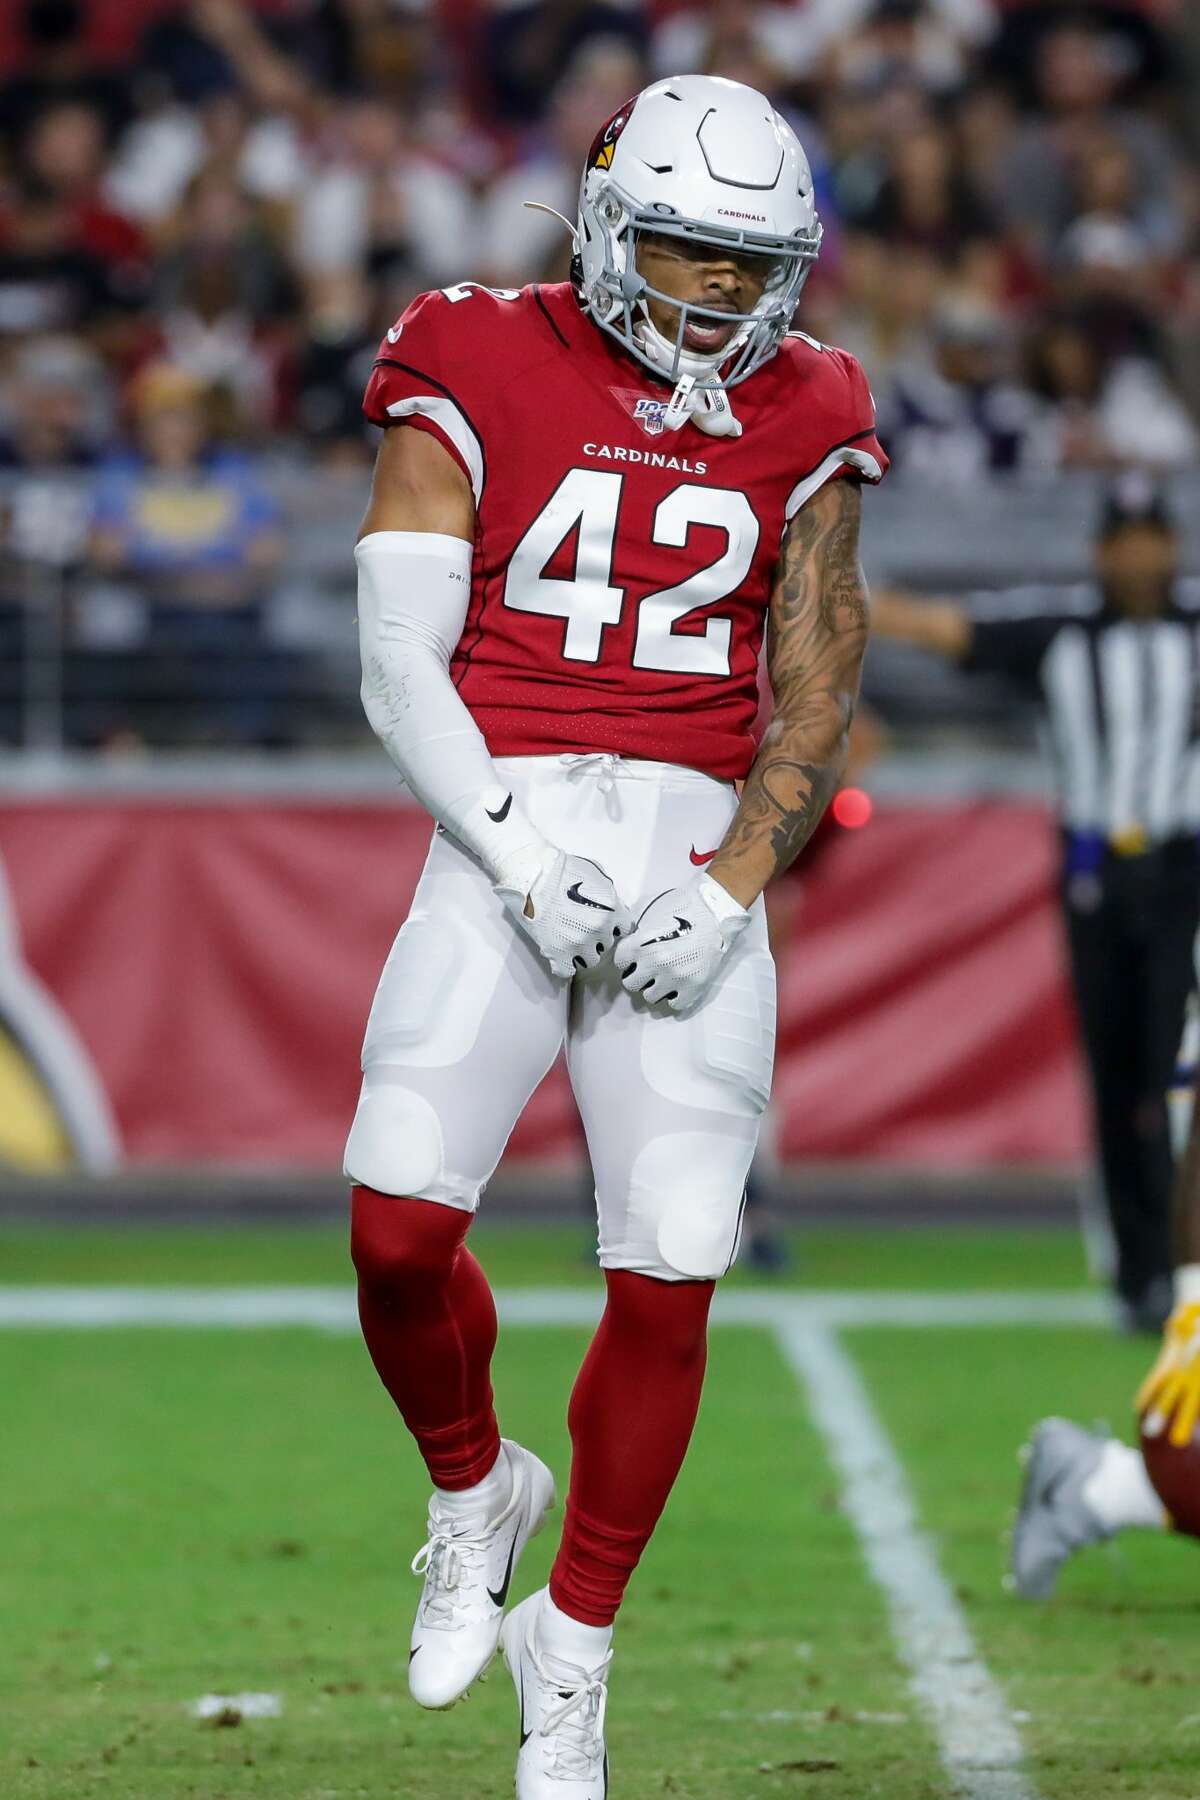 GLENDALE, AZ - AUGUST 08: Arizona Cardinals defensive back Jonathan Owens (42) celebrates a big play during the NFL preseason football game between the Los Angeles Chargers and the Arizona Cardinals on August 8, 2019 at State Farm Stadium in Glendale, Arizona. (Photo by Kevin Abele/Icon Sportswire via Getty Images)